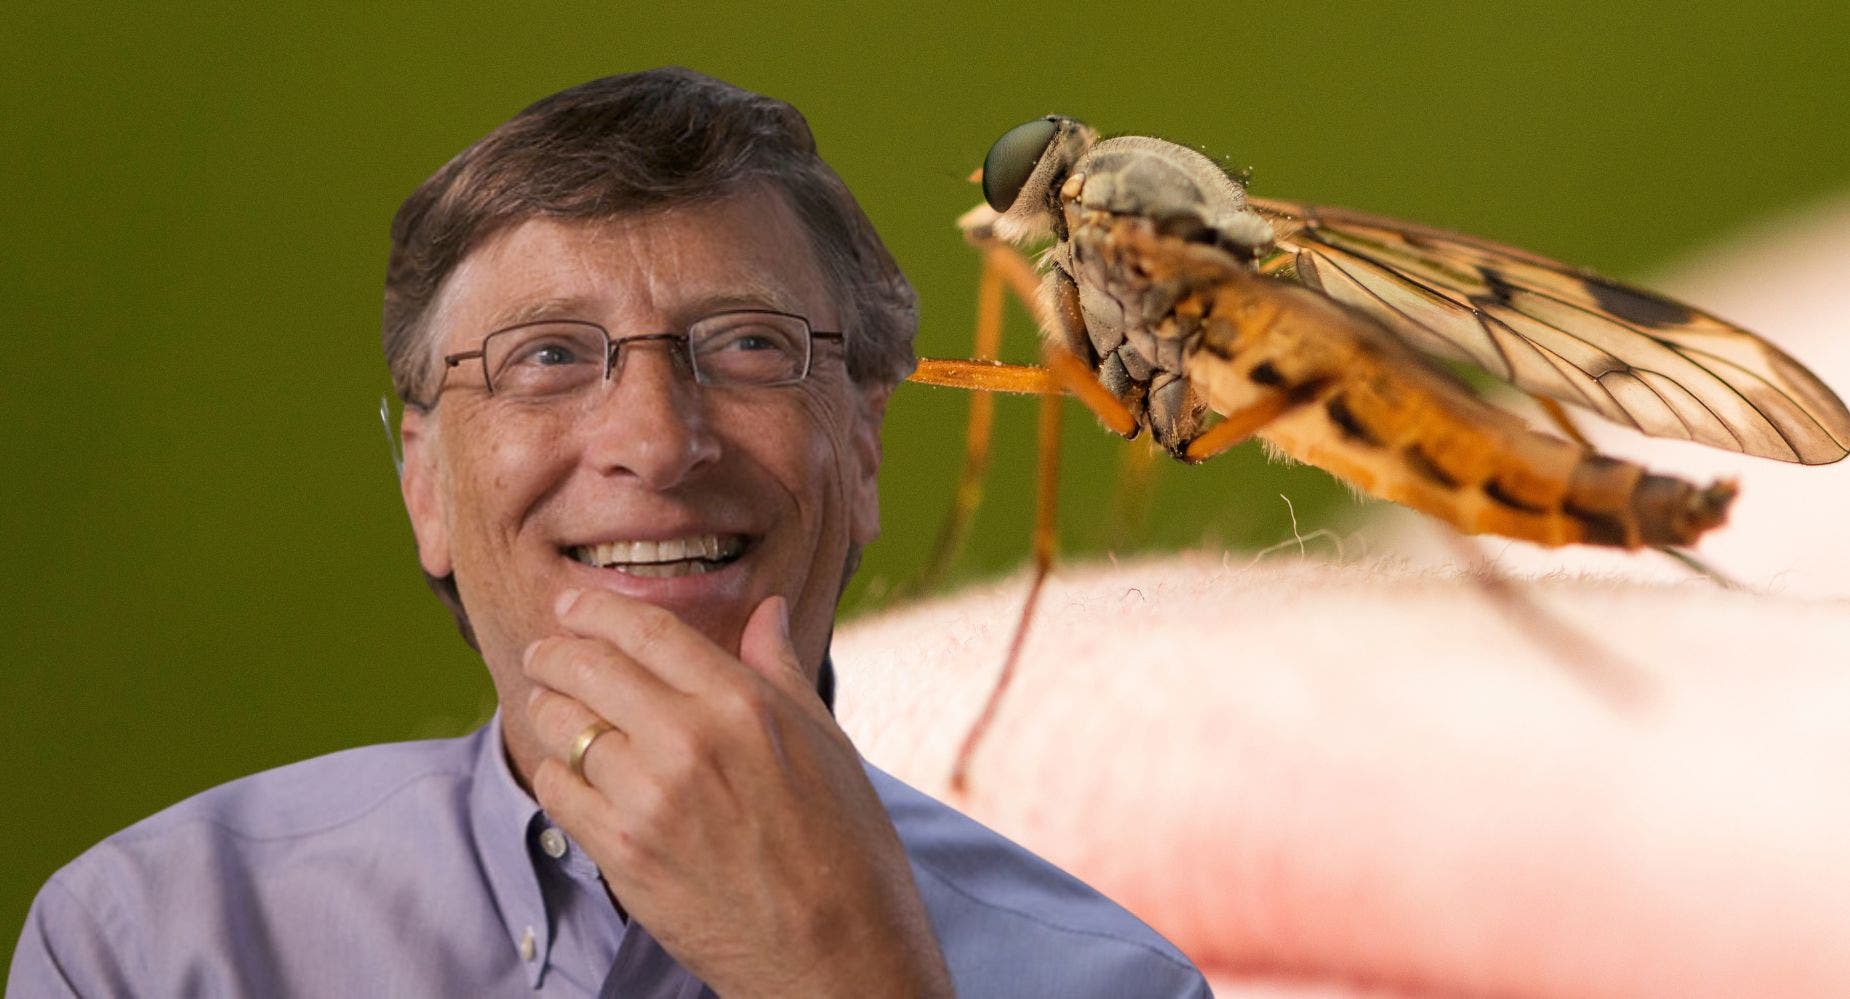 [WATCH] Bill Gates Unleash A Swarm Of Mosquitoes Onto An Unsuspecting Crowd